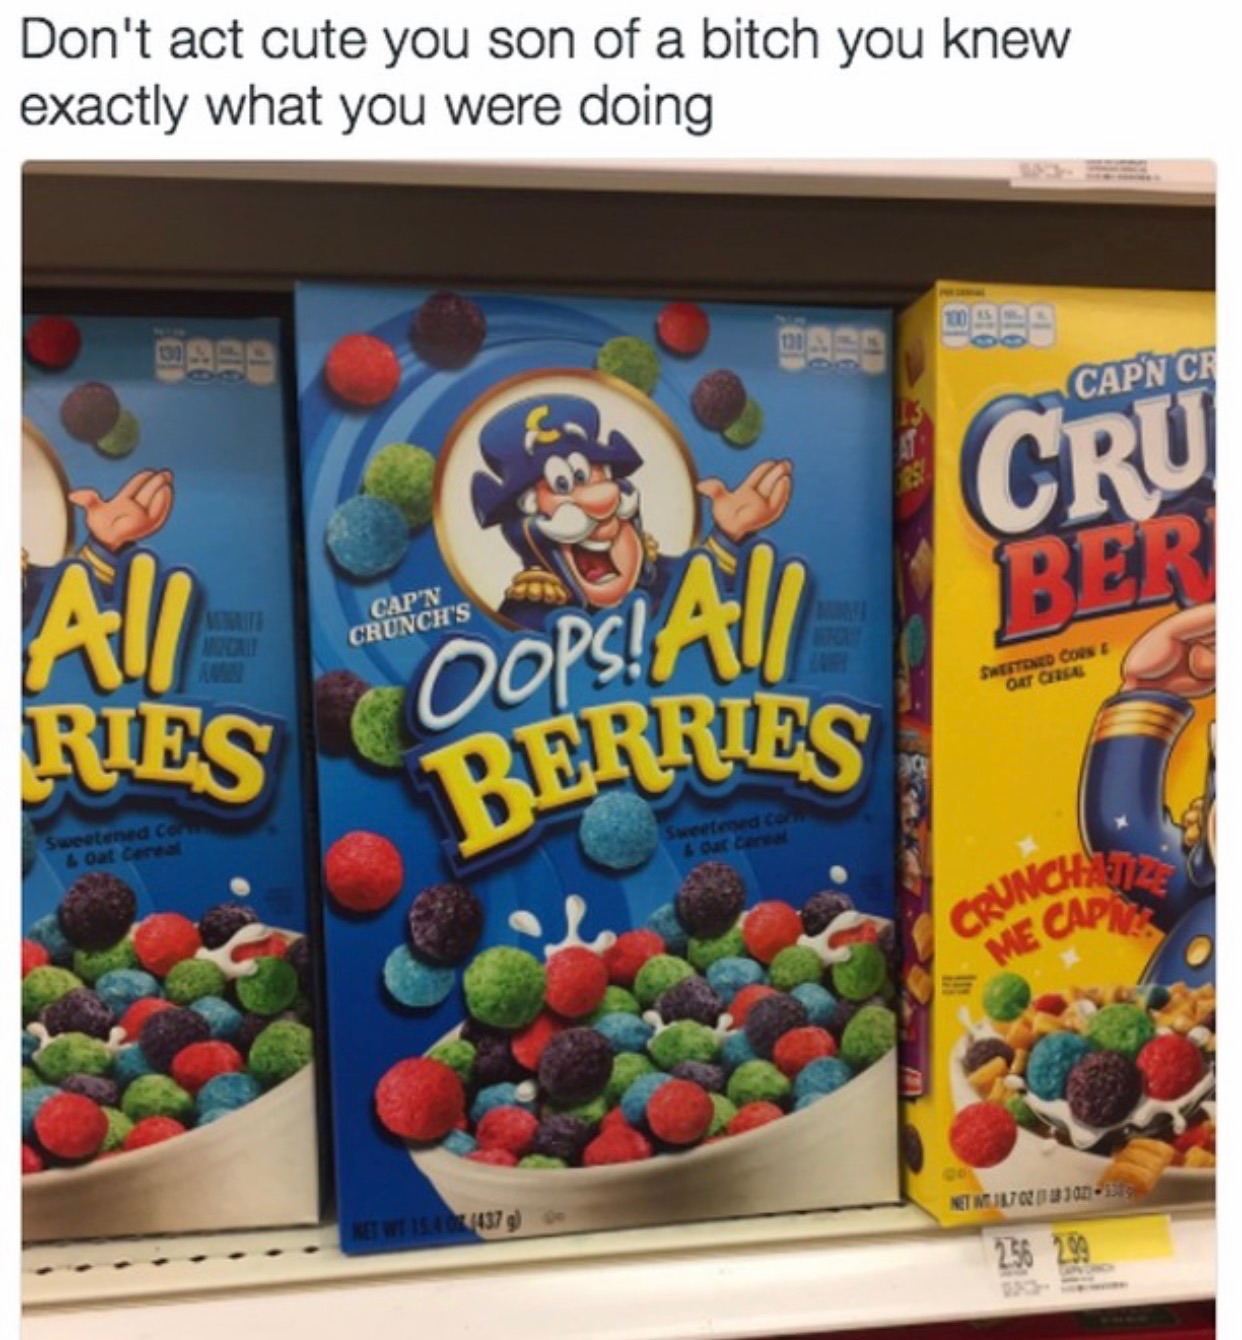 oops all berries - Don't act cute you son of a bitch you knew exactly what you were doing page Capn Cf Cru Ber Capn Crunch'S Detded Coet Se Oops! A Ries Berries Sweetened Co Oat care Unchartz Capiz Crun Me Netto 256 29